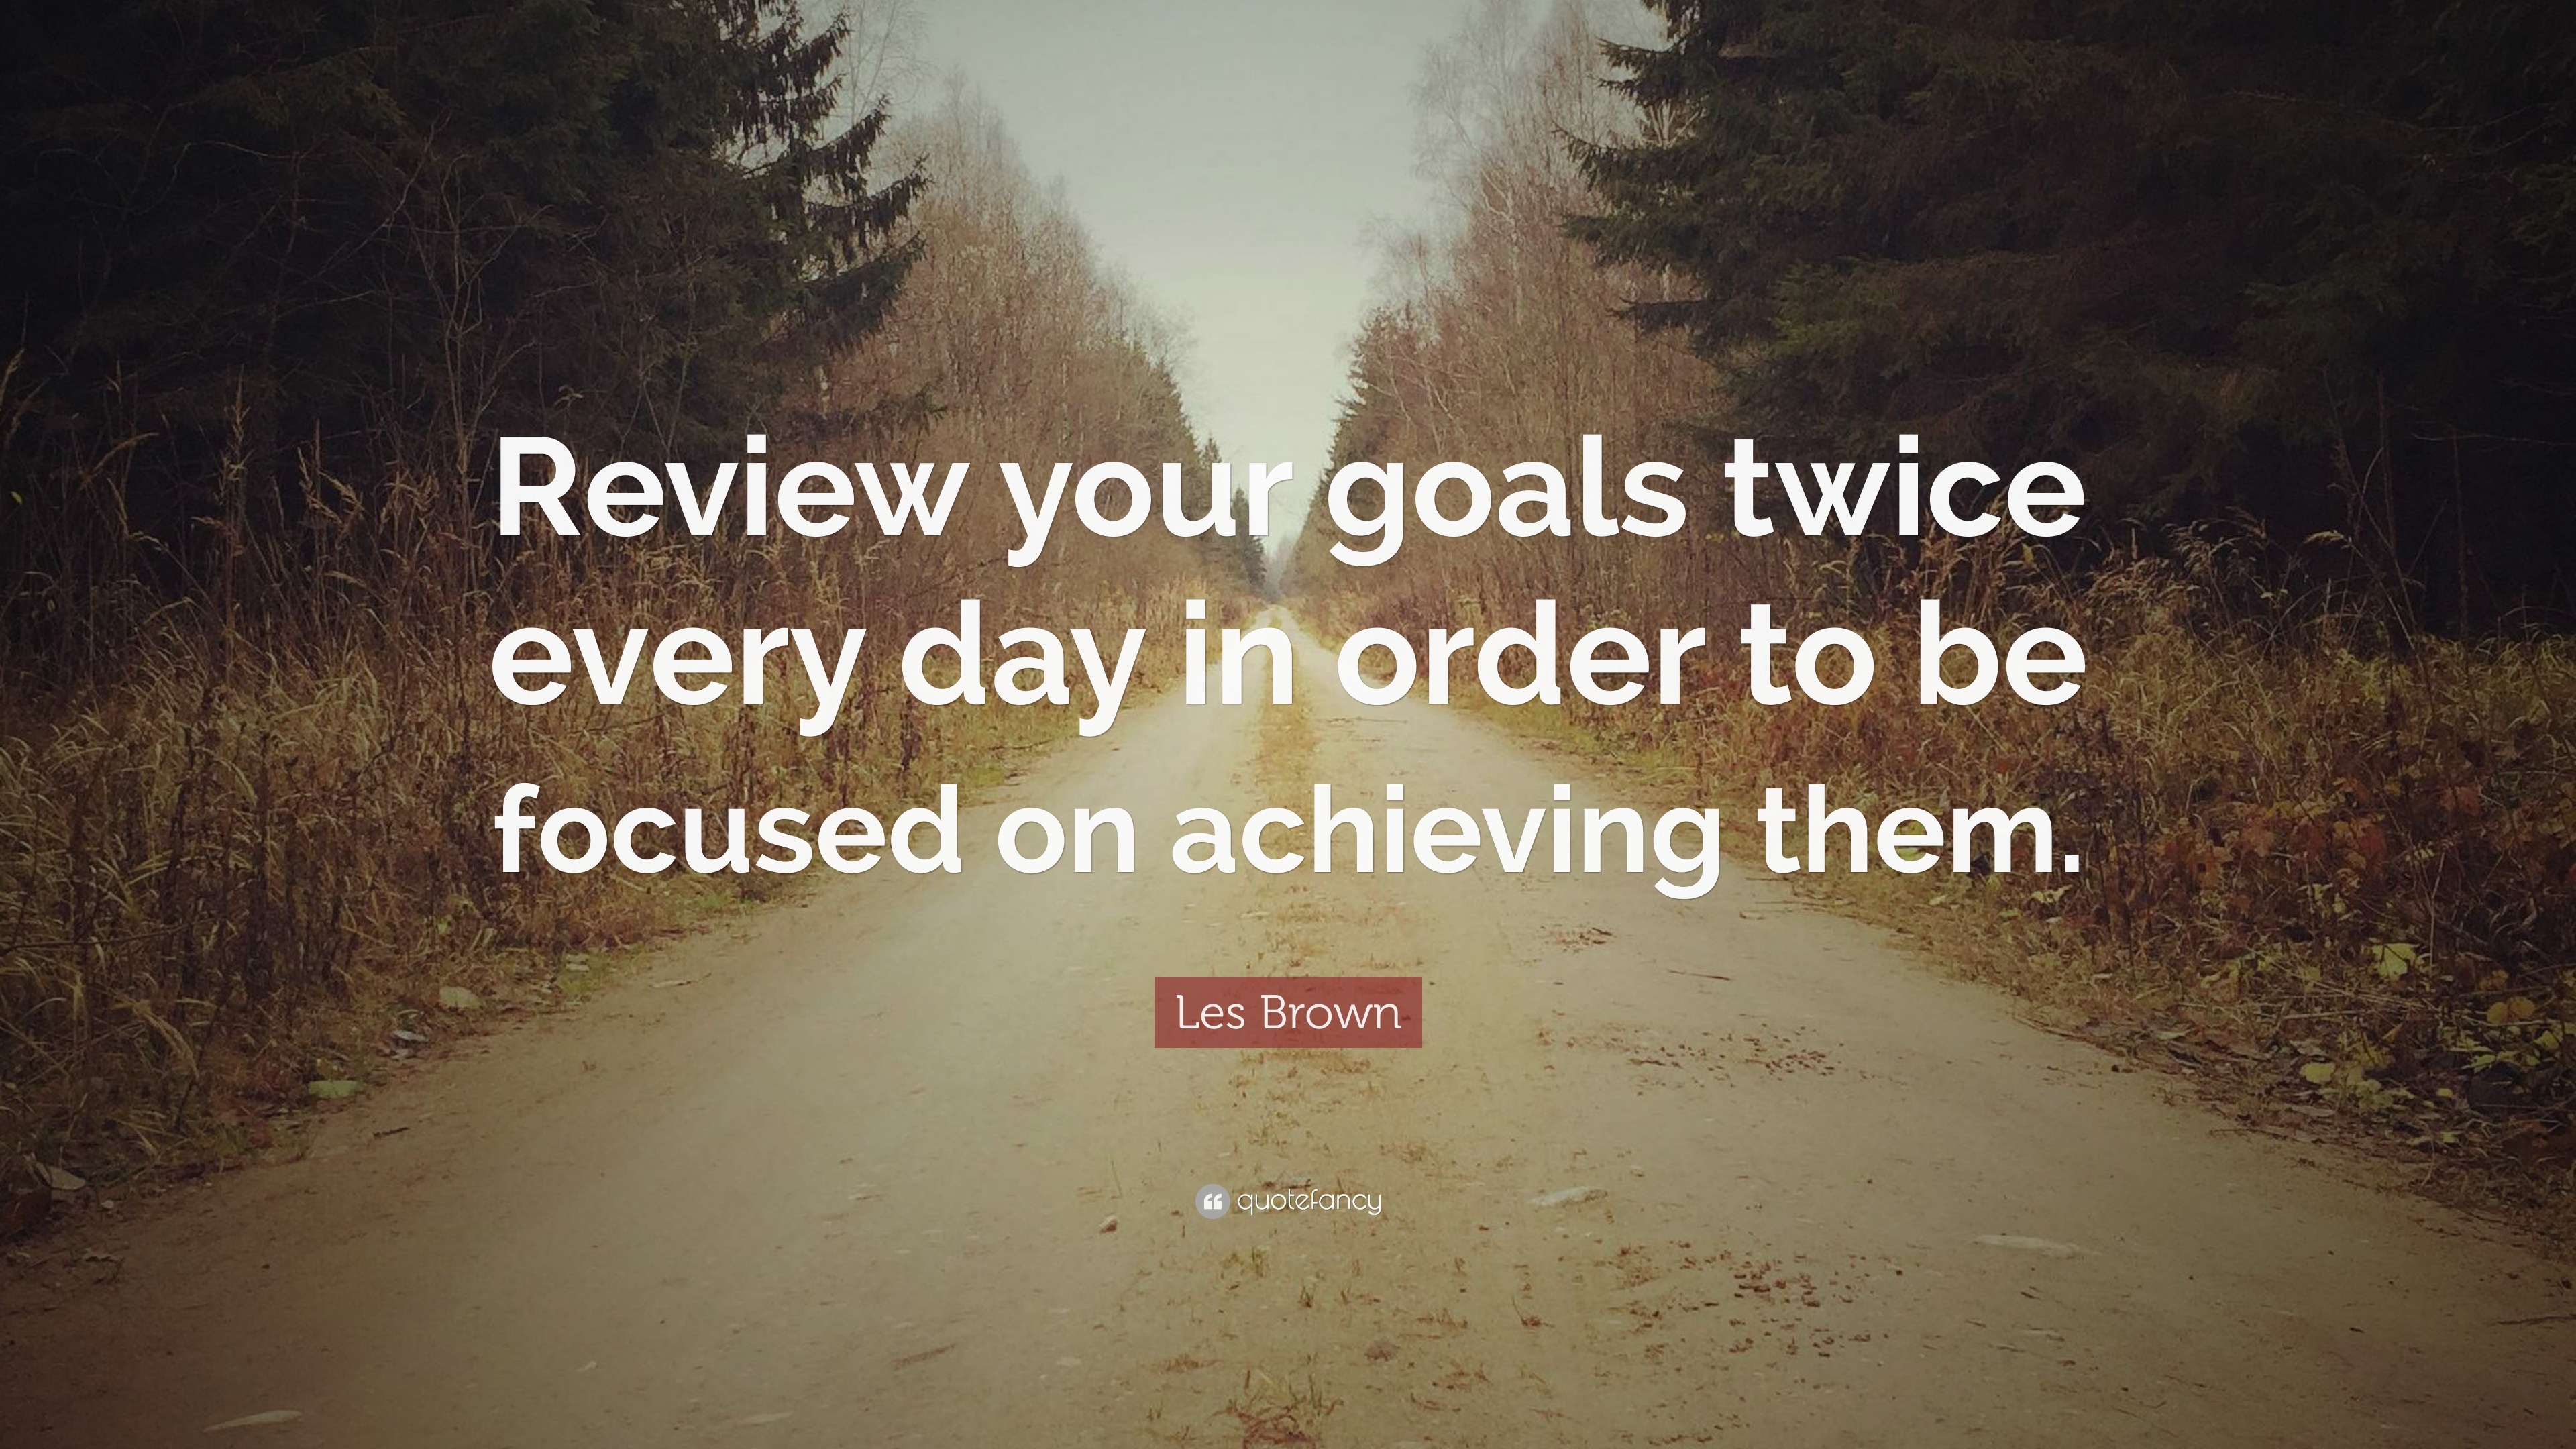 Les Brown Quote: “Review your goals twice every day in order to be ...